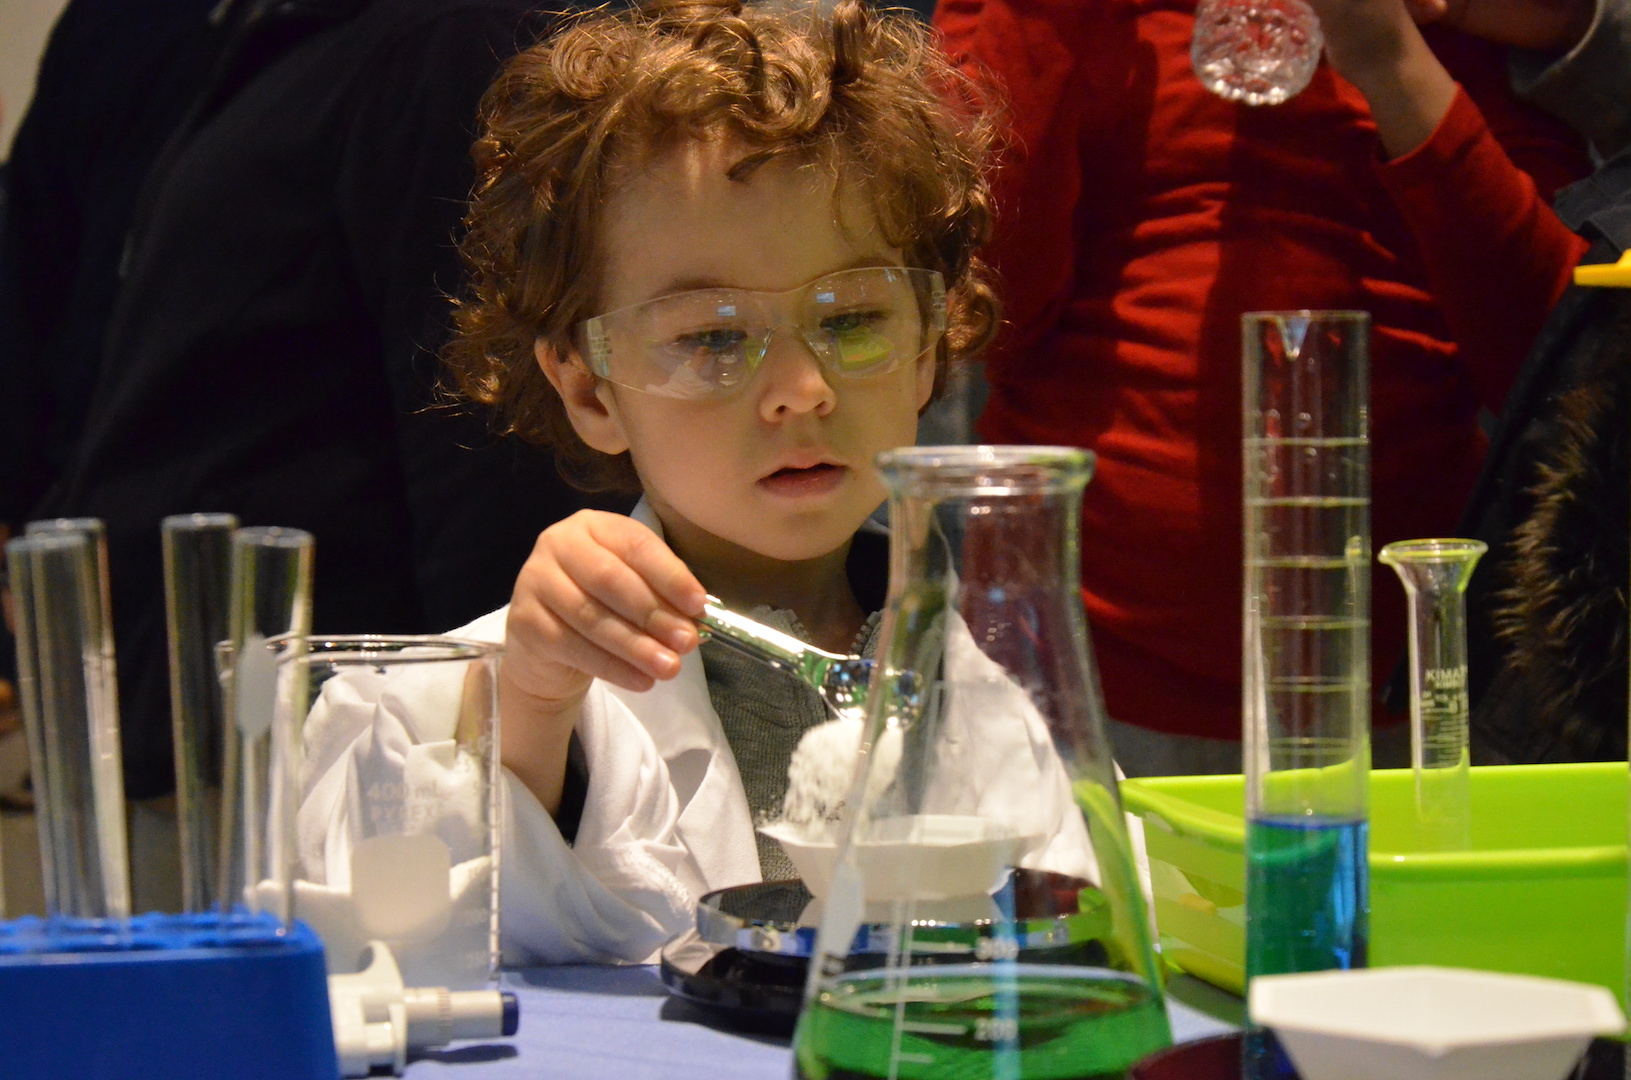 Boy doing science experiment while wearing lab coat